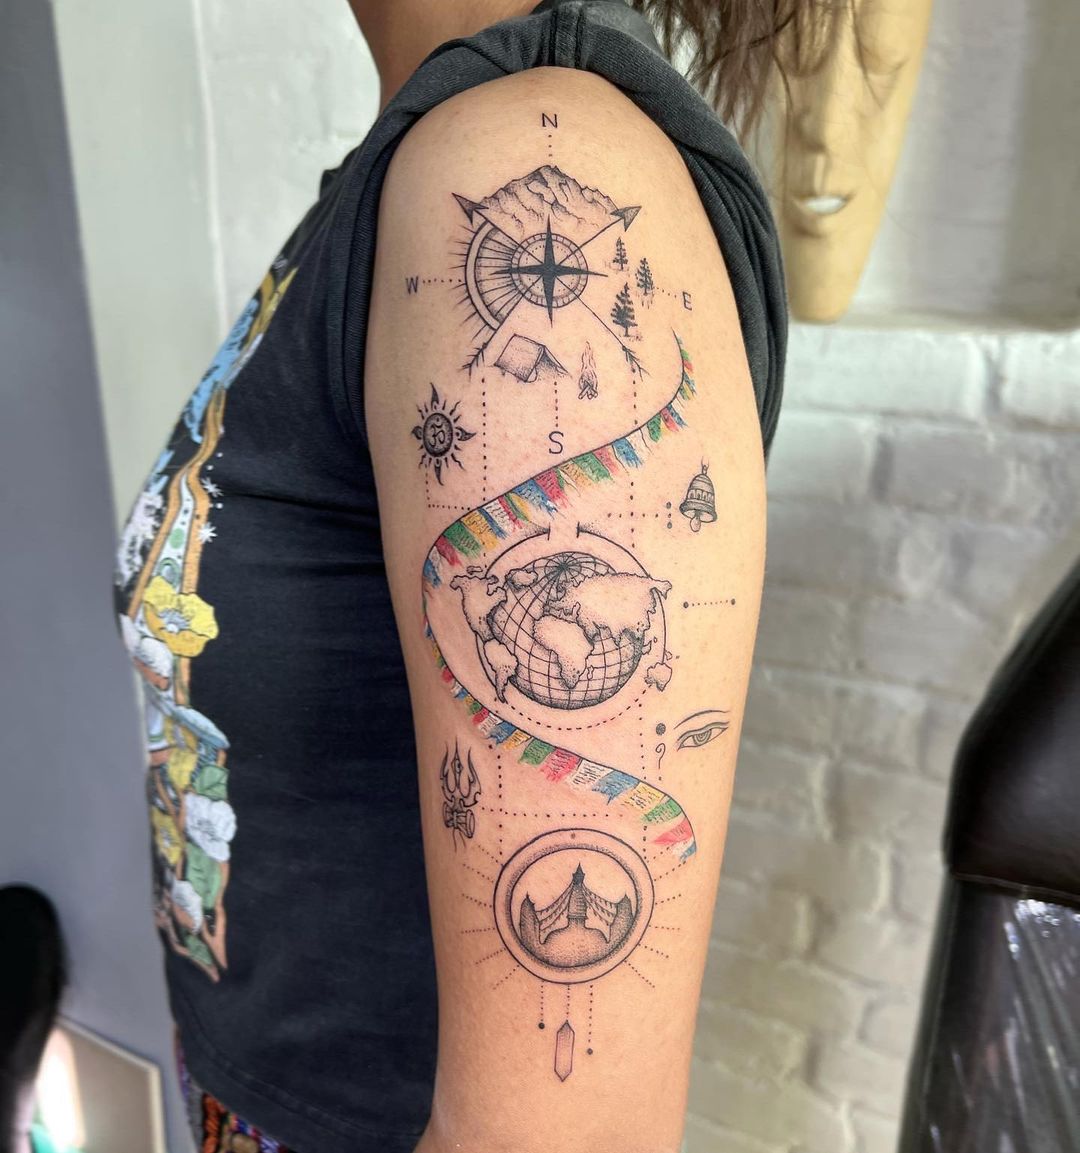 French Artists Illustrative Tattoos Depict Travel Memories